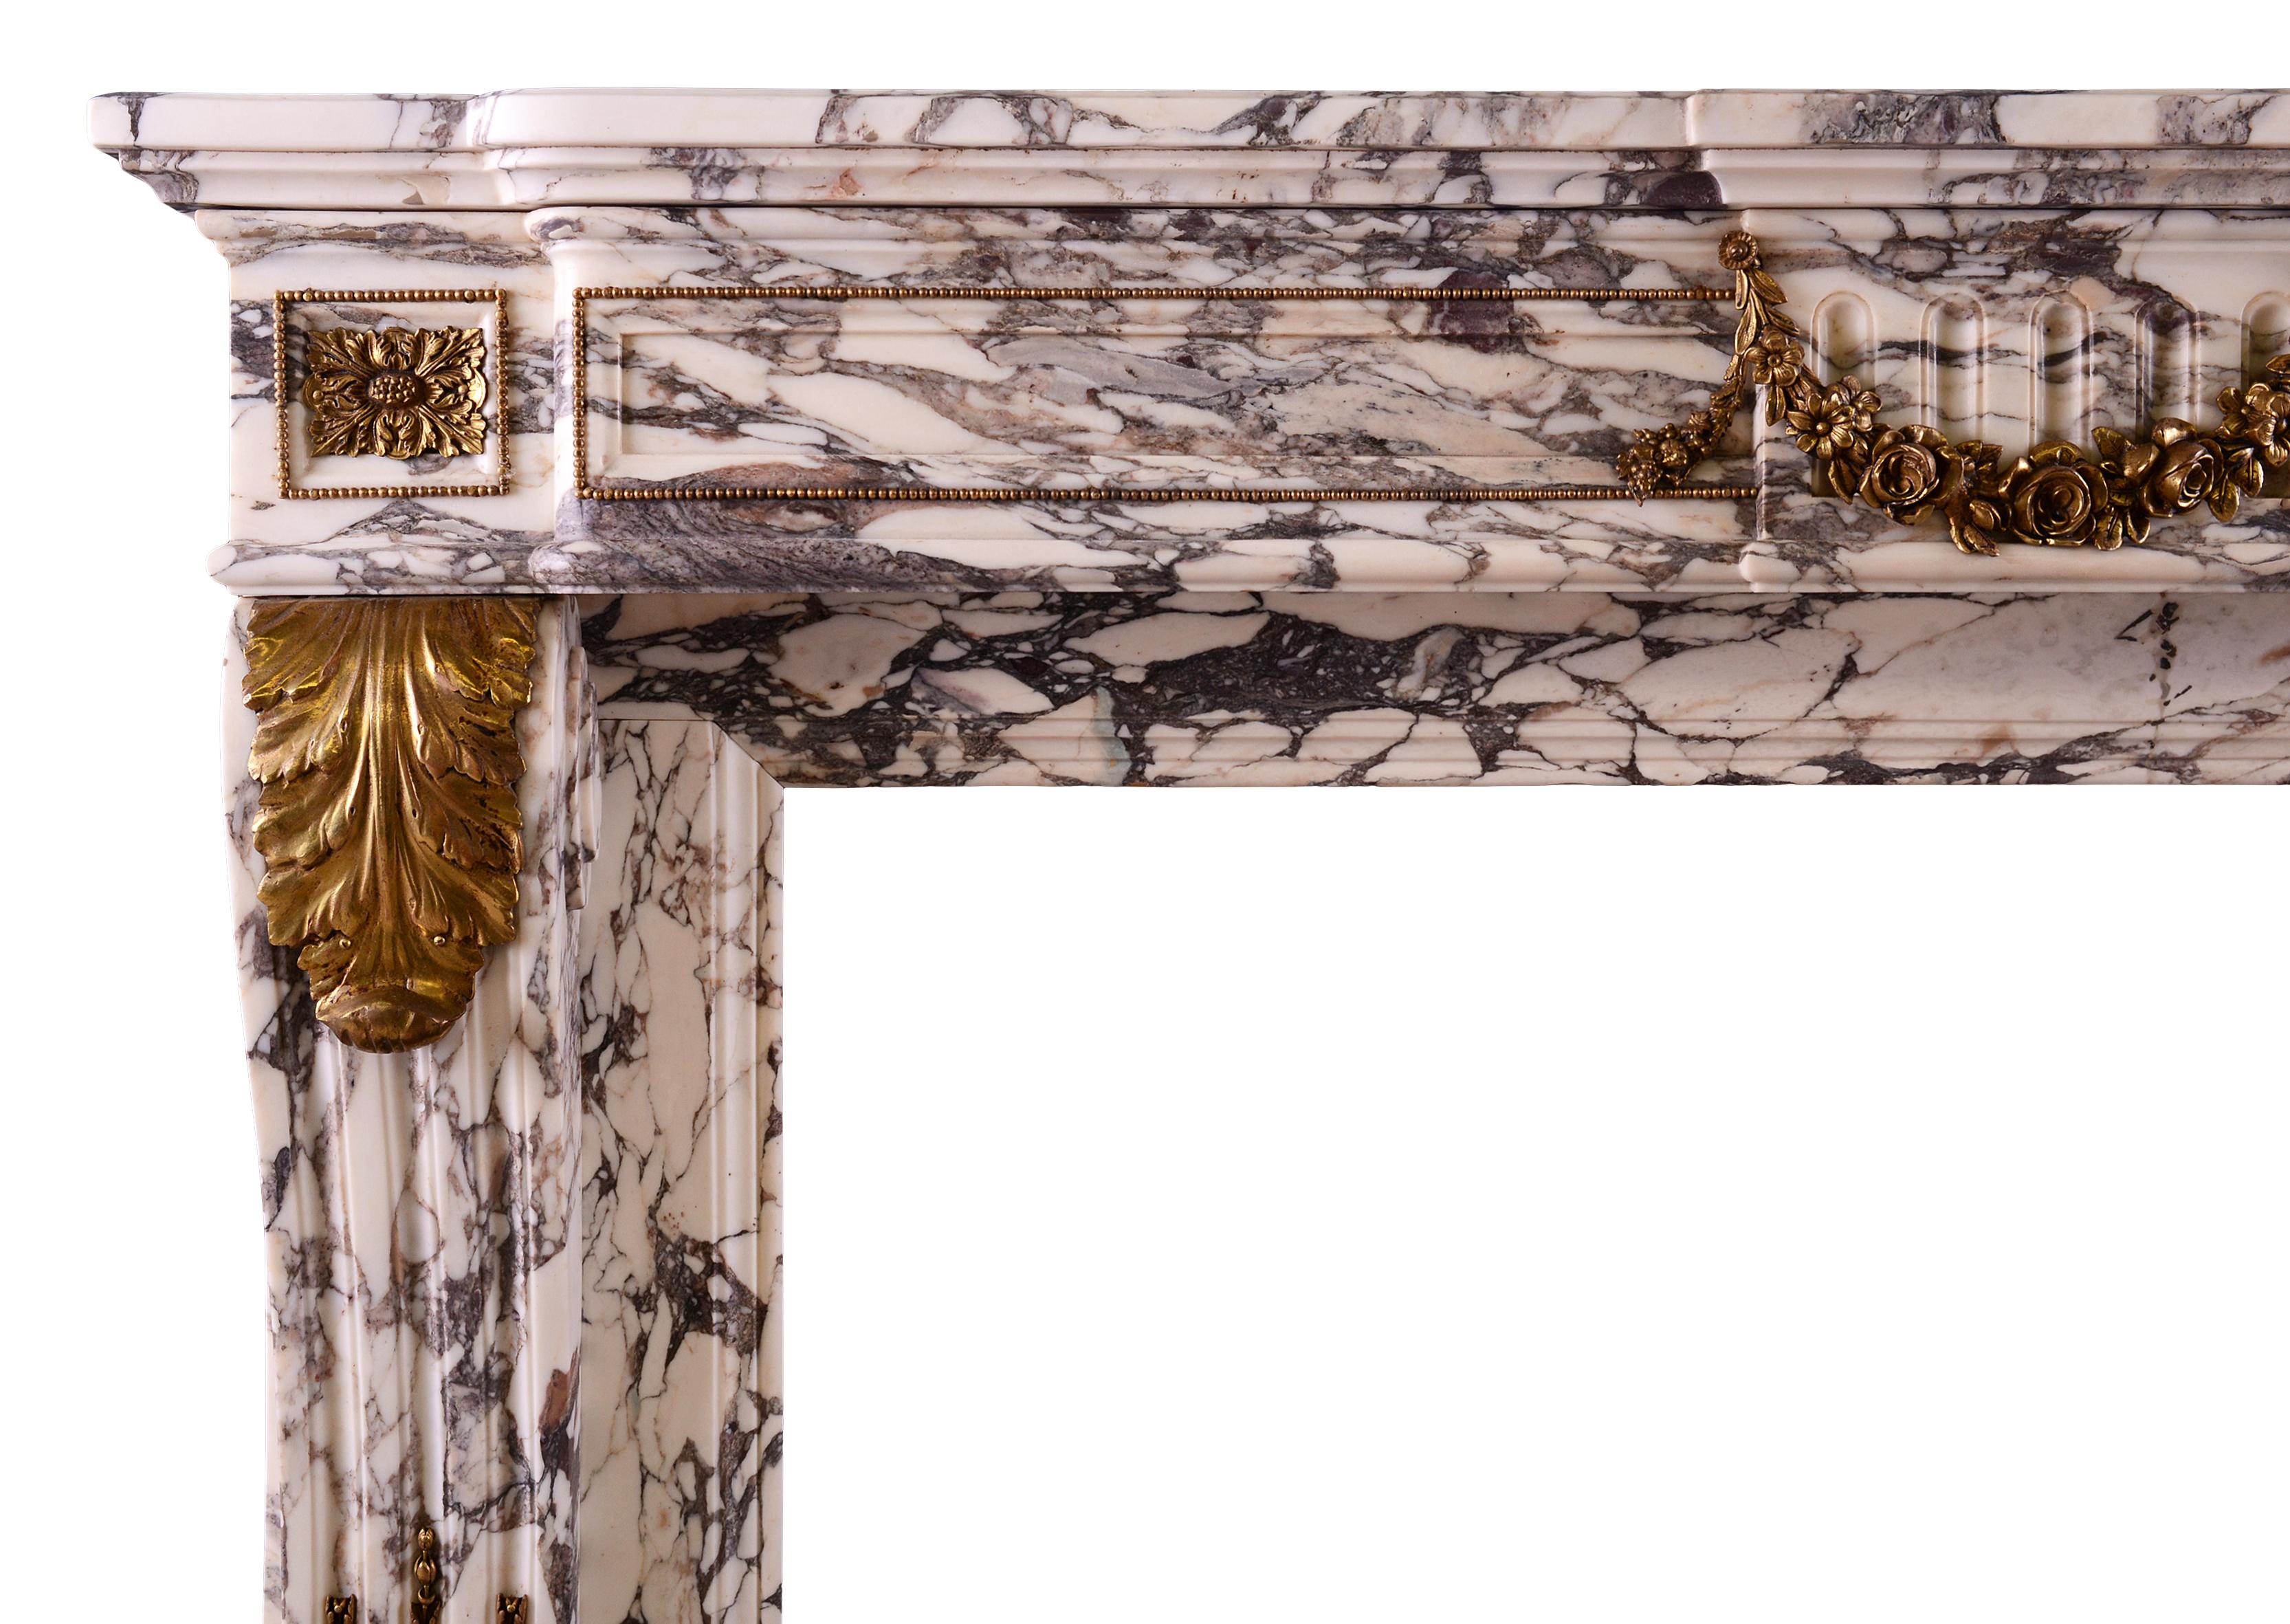 A good quality French Louis XVI style fireplace in Breche Violette marble. The scrolled, stop-fluted jambs adorned with acanthus leaf Ormolu, surmounted by rectangular ormolu paterae and beading. The panelled, shaped frieze with Ormolu beading